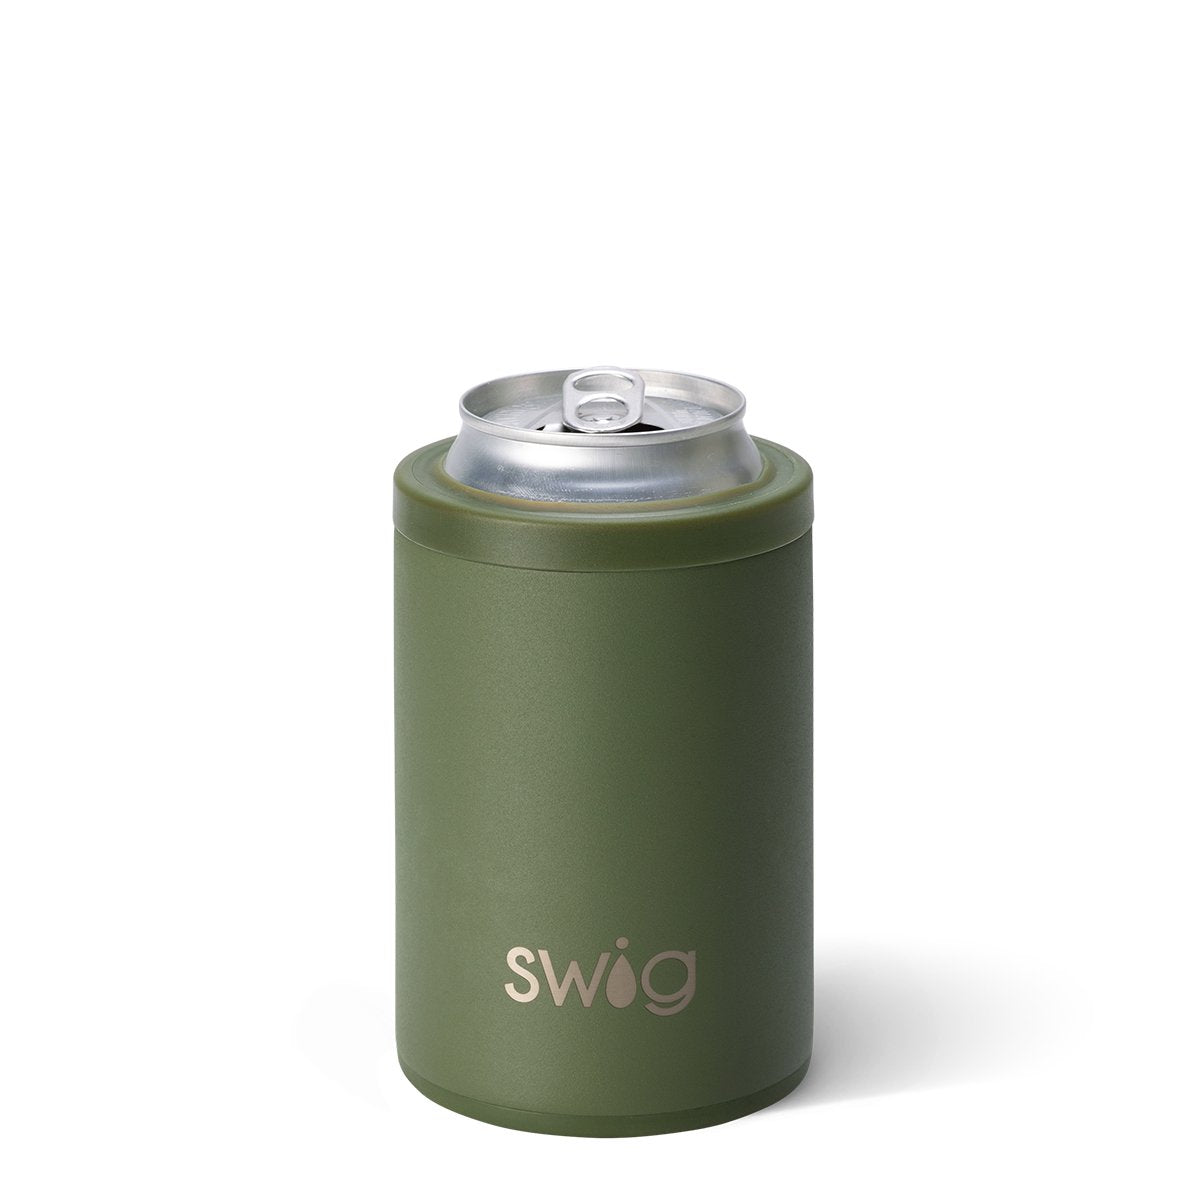 Swig 12 oz bottle and can koozie